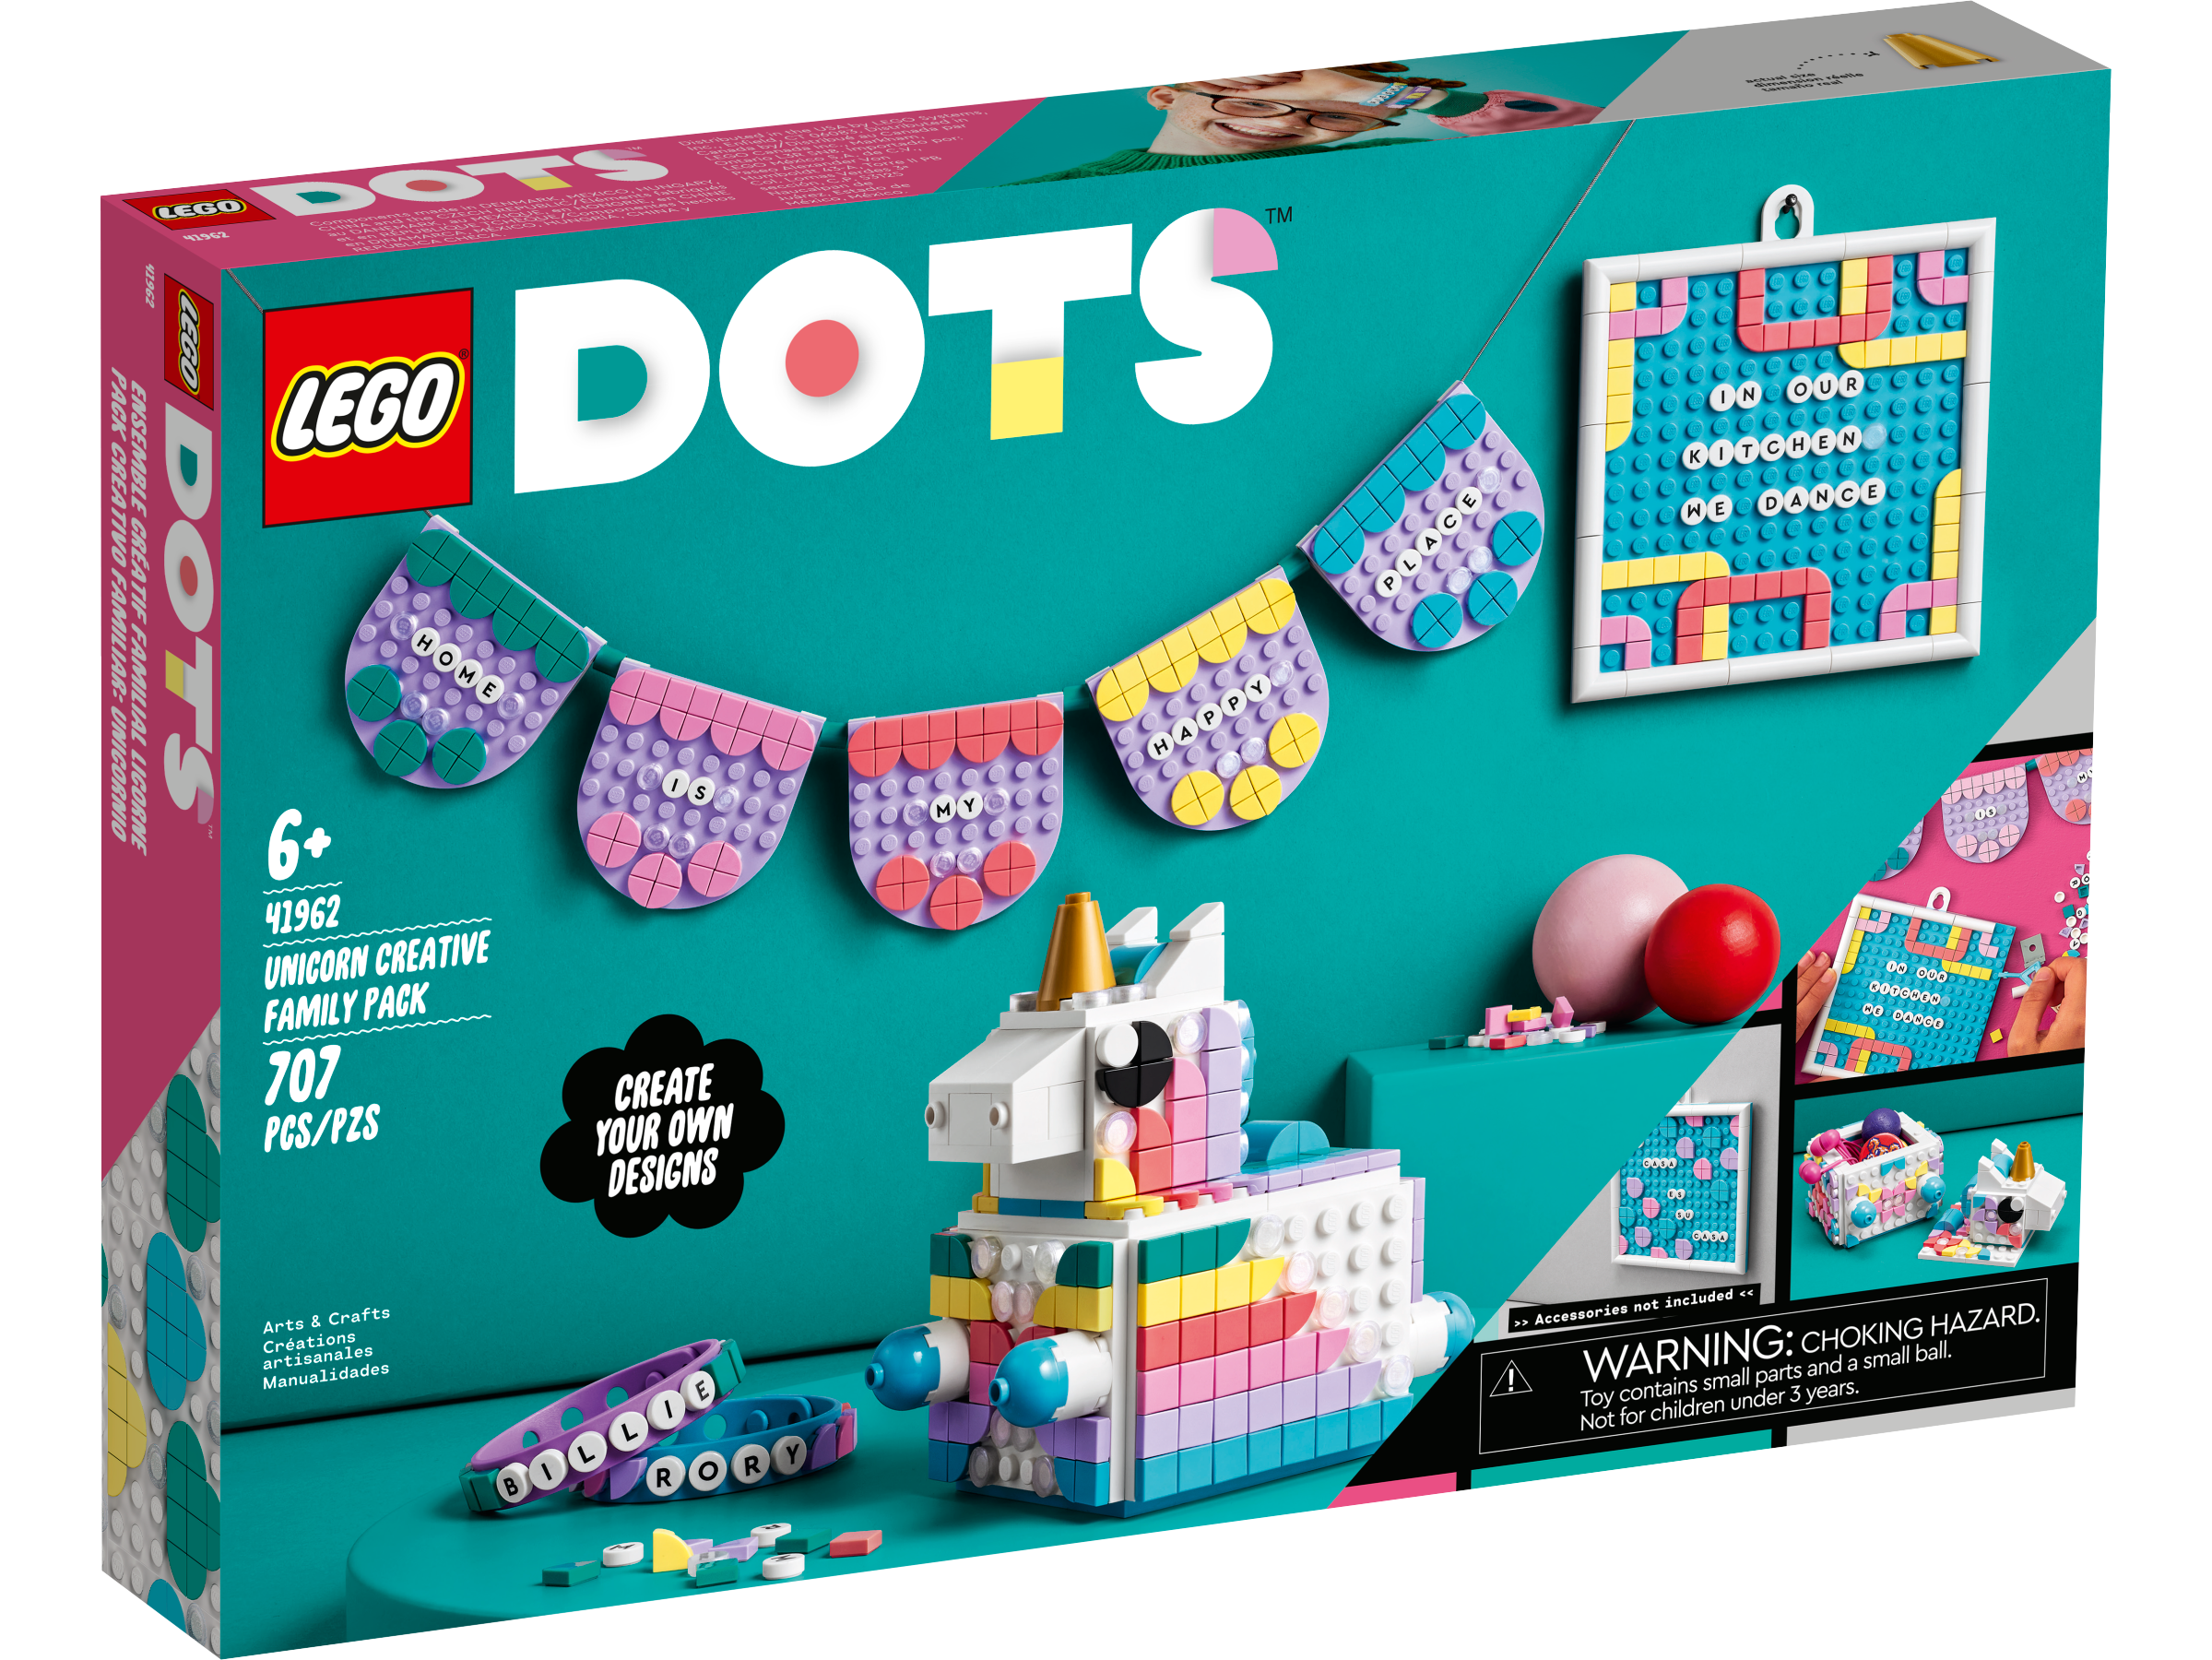 Unicorn Creative Family Pack 41962 DOTS online US | | LEGO® the Official Buy at Shop